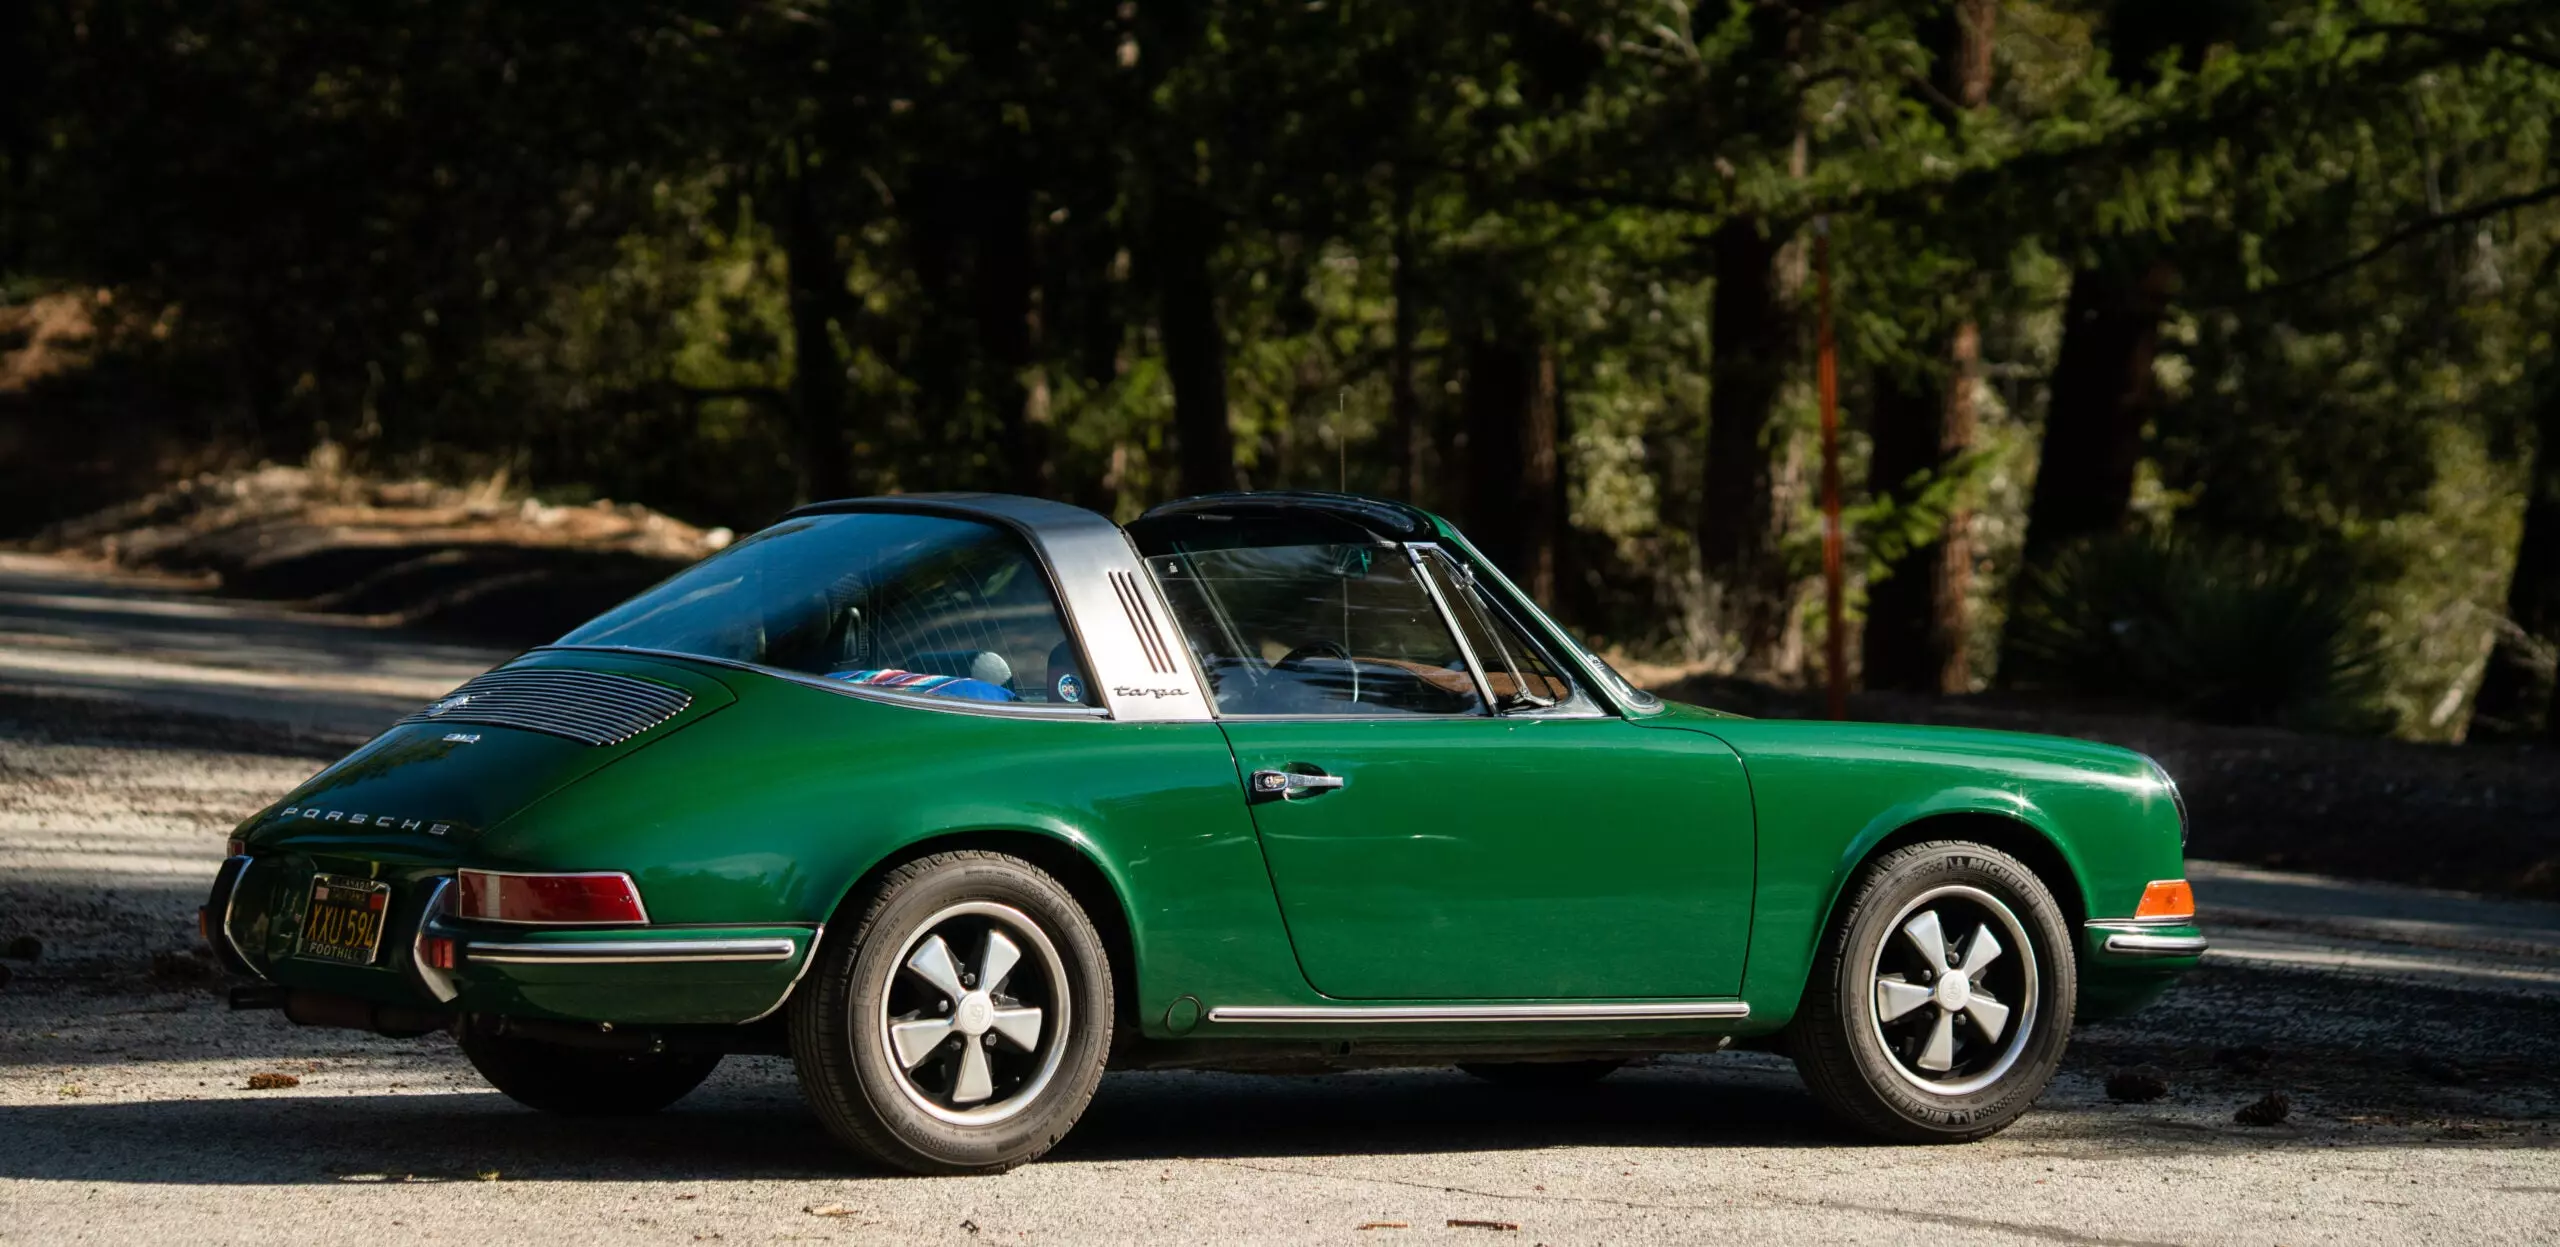 Of Course We&#8217;re Sharing An &#8220;Irish Green&#8221; Porsche on St. Patrick&#8217;s Day